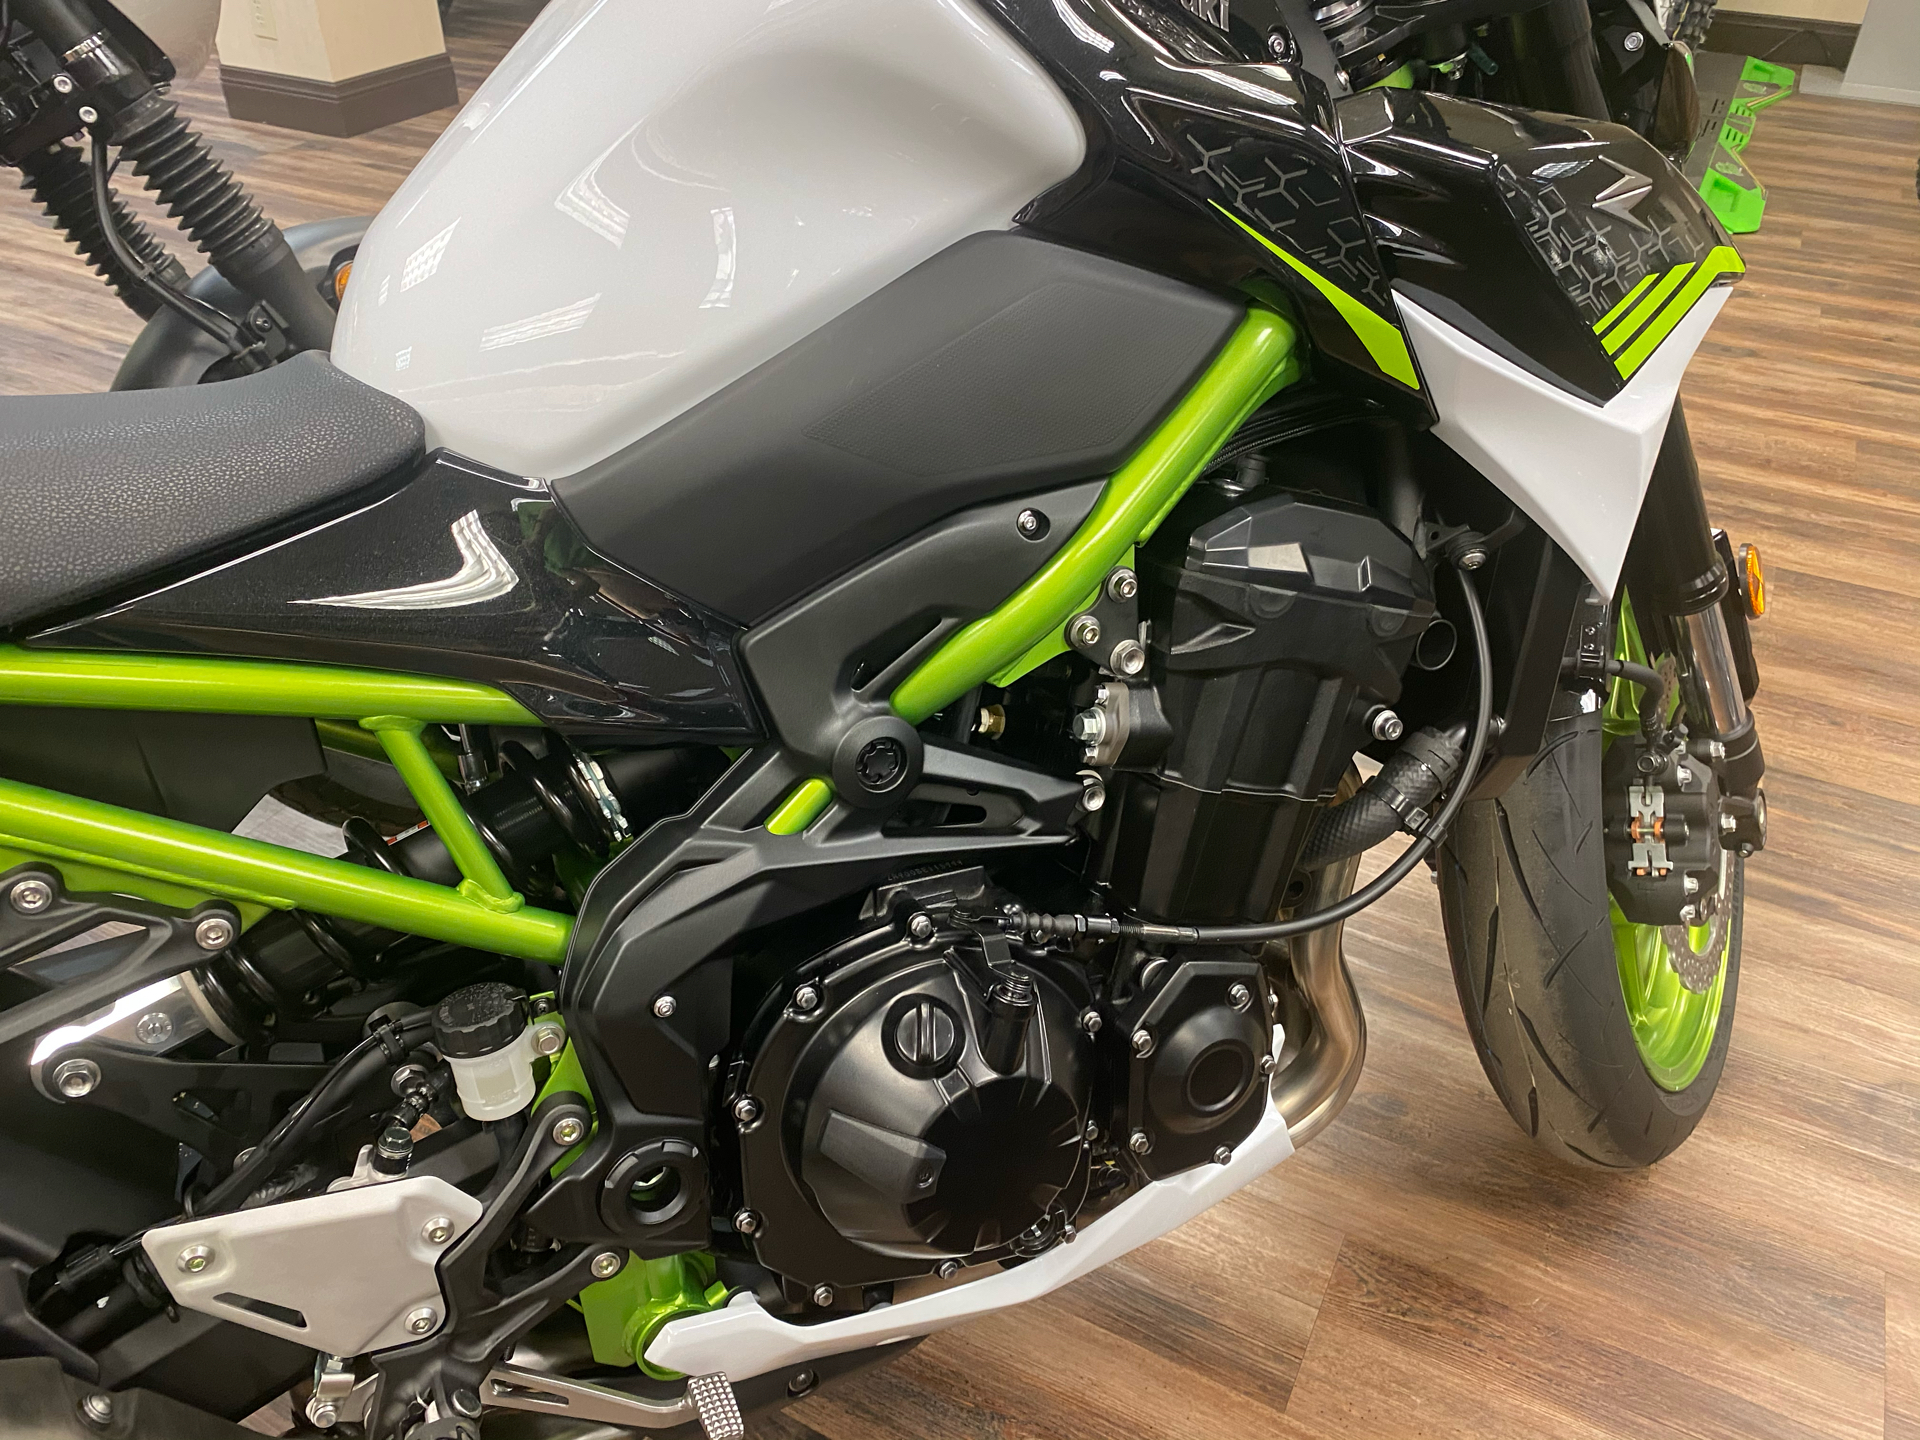 New 2021 Kawasaki Z900 ABS in Statesville, NC | Stock Number: A46611 greatwesternmotorcycles.com